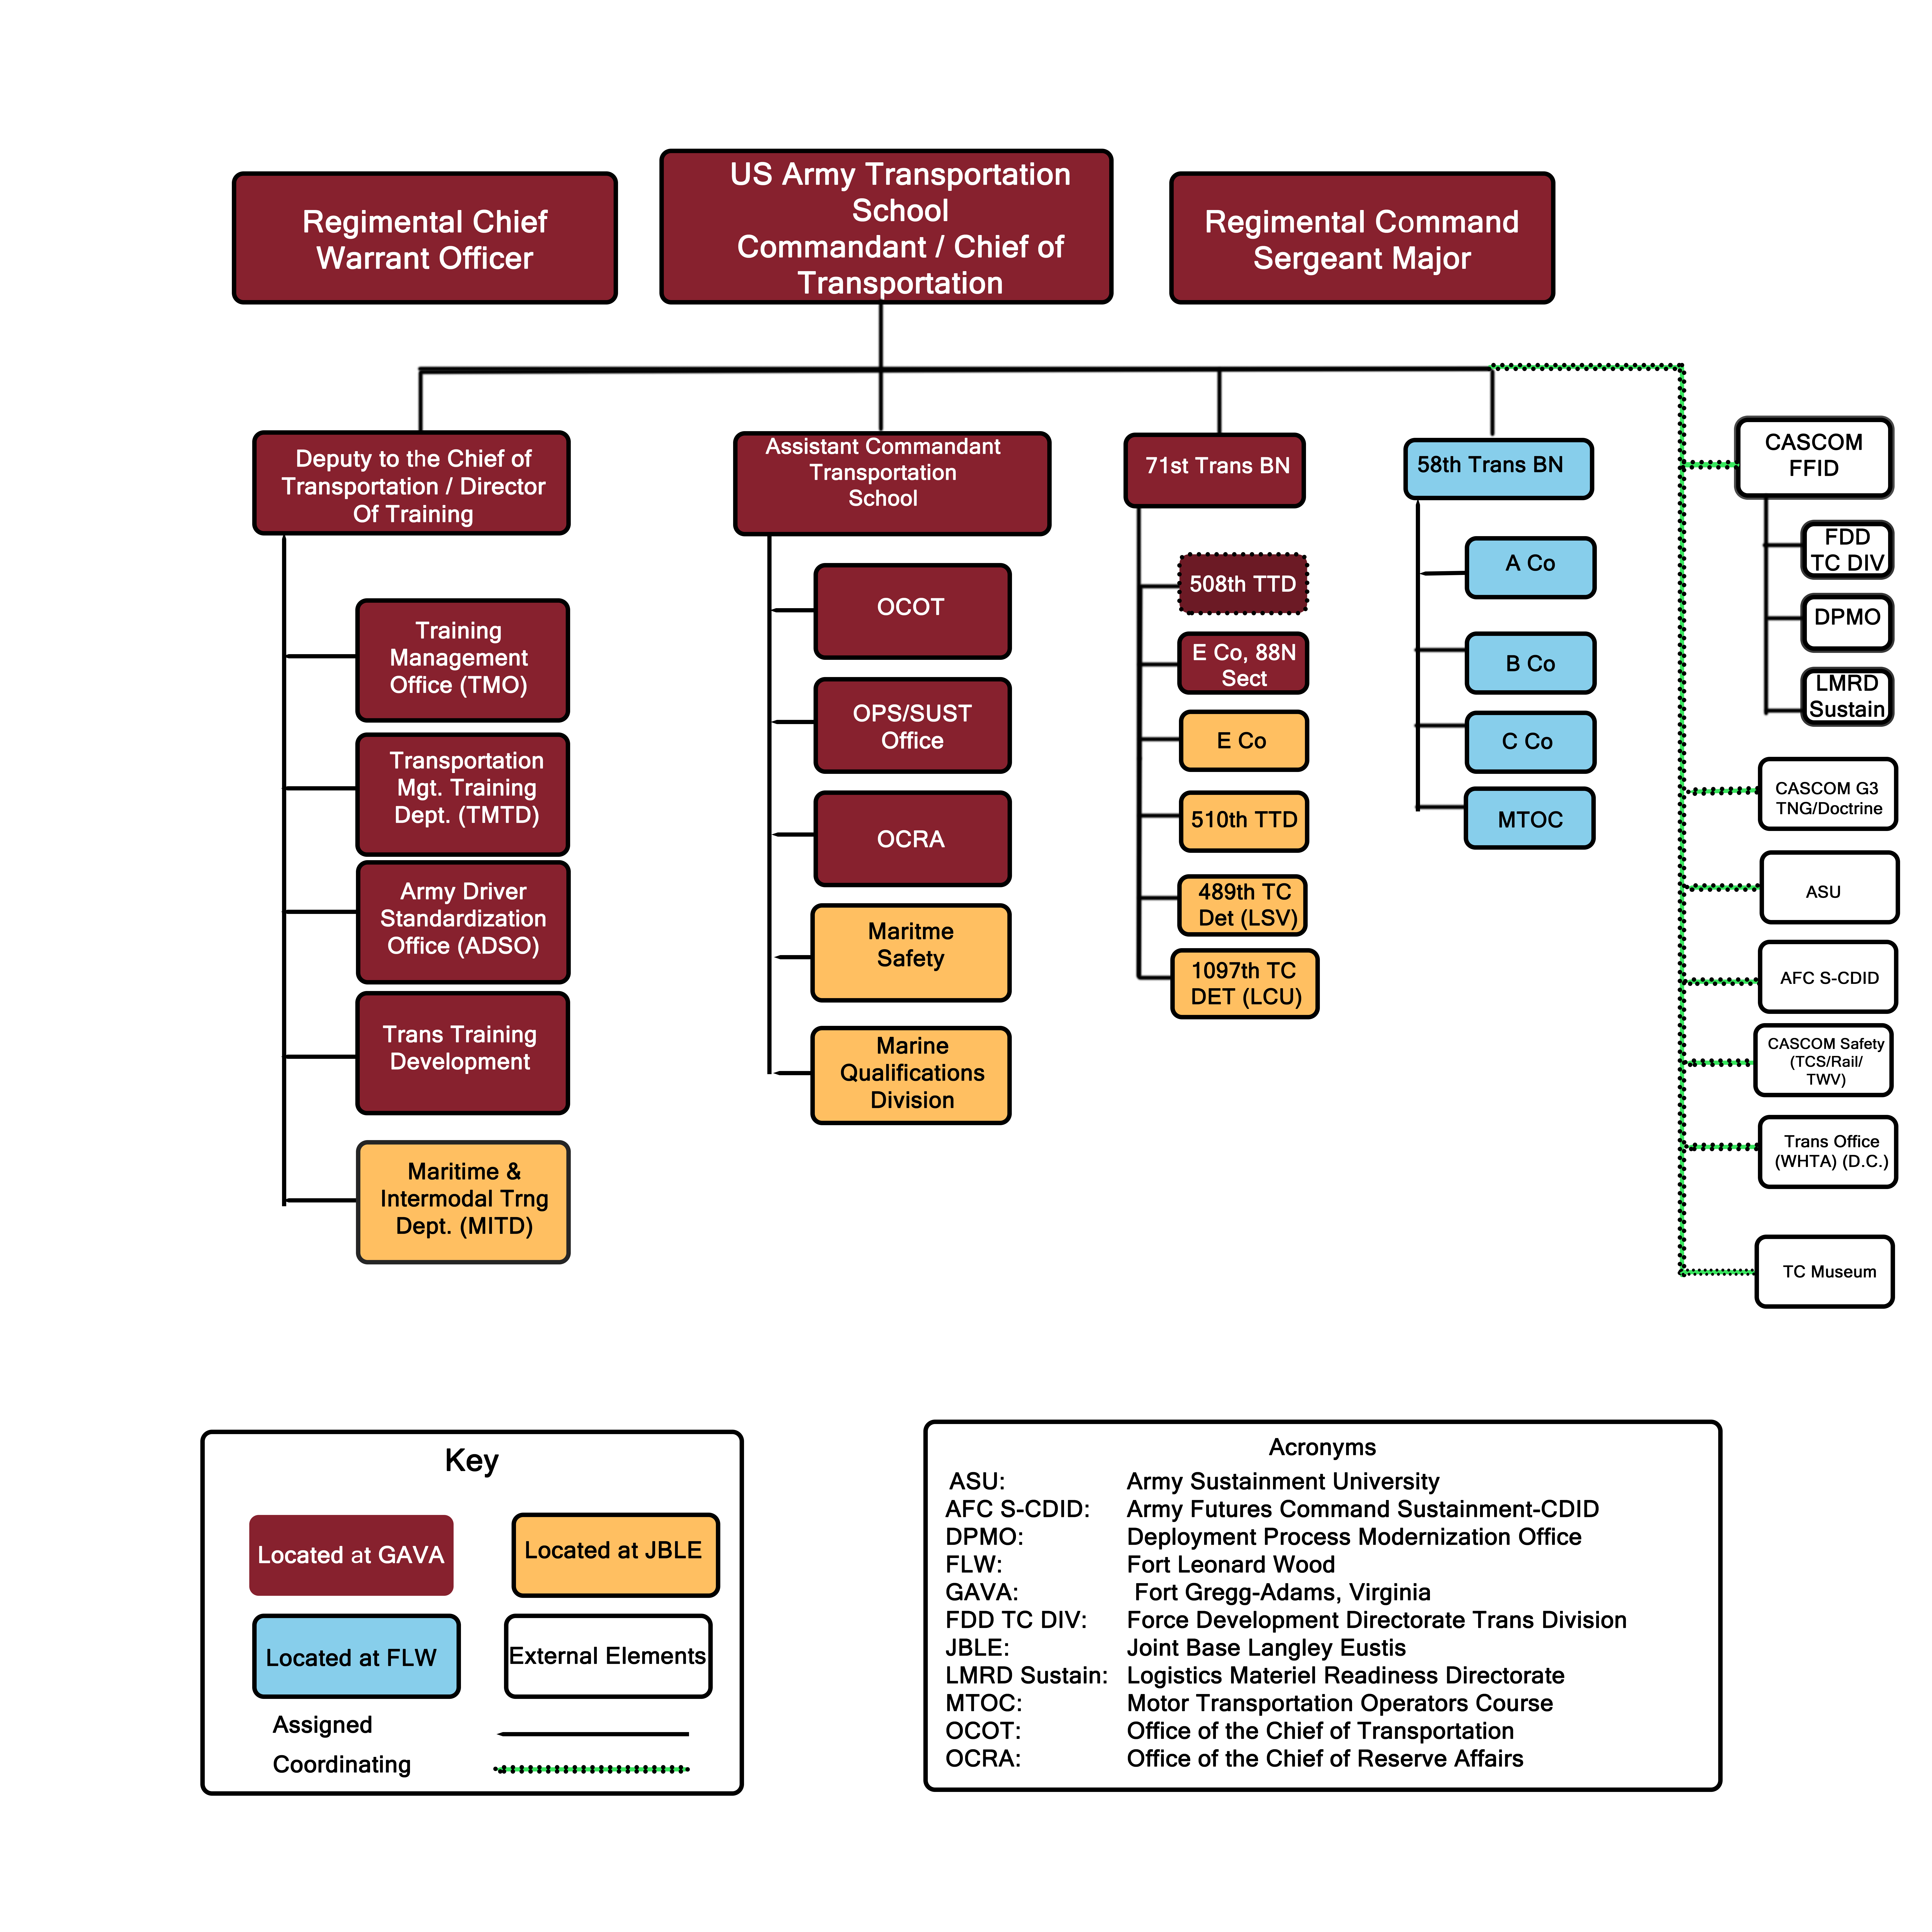 Organizational chart for the Transportation Corps and Transportation School.